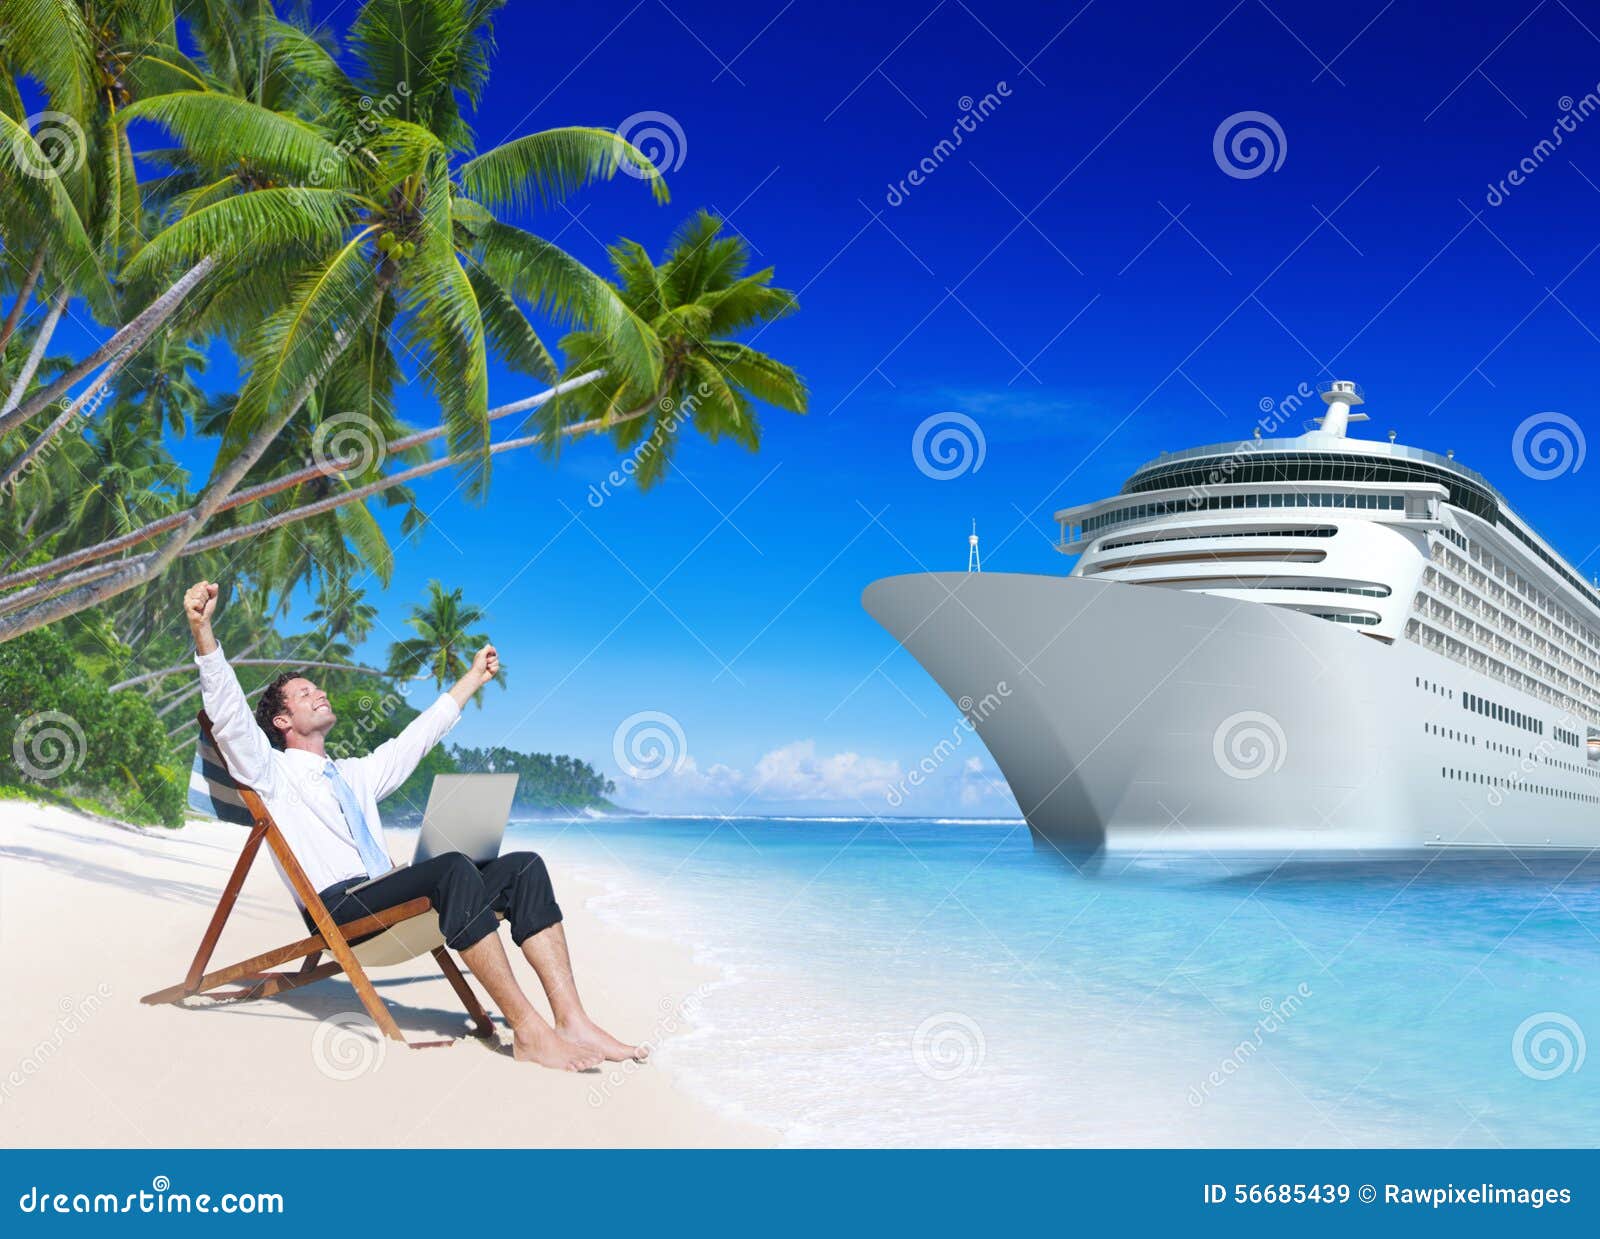 businessman relaxation vacation outdoors beach concept